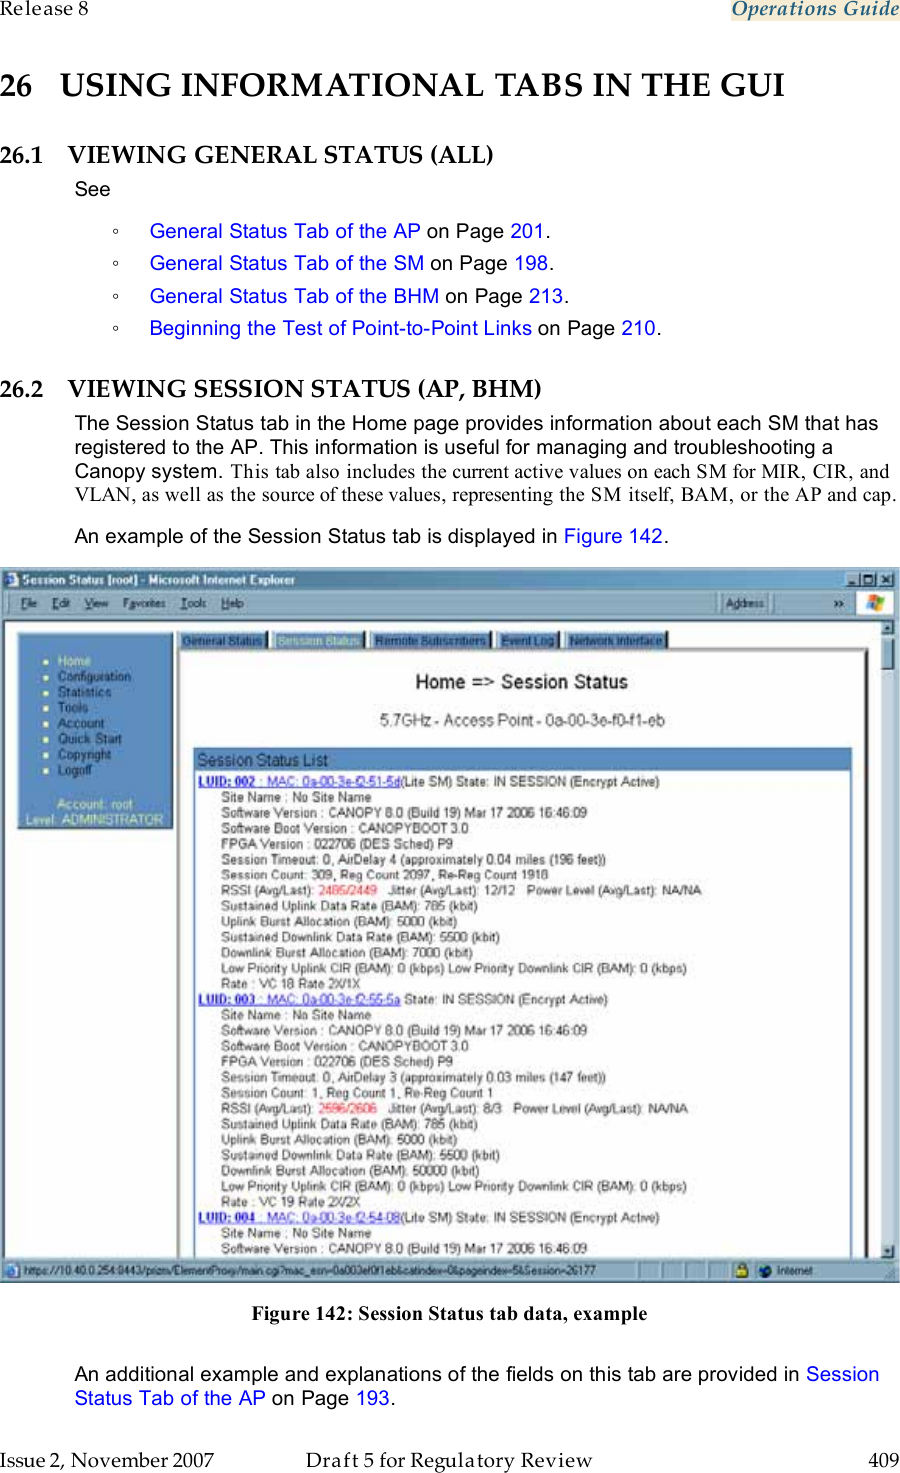 Release 8    Operations Guide   Issue 2, November 2007  Draft 5 for Regulatory Review  409     26 USING INFORMATIONAL TABS IN THE GUI 26.1 VIEWING GENERAL STATUS (ALL) See ◦ General Status Tab of the AP on Page 201. ◦ General Status Tab of the SM on Page 198. ◦ General Status Tab of the BHM on Page 213. ◦ Beginning the Test of Point-to-Point Links on Page 210. 26.2 VIEWING SESSION STATUS (AP, BHM) The Session Status tab in the Home page provides information about each SM that has registered to the AP. This information is useful for managing and troubleshooting a Canopy system. This tab also includes the current active values on each SM for MIR, CIR, and VLAN, as well as the source of these values, representing the SM itself, BAM, or the AP and cap. An example of the Session Status tab is displayed in Figure 142.   Figure 142: Session Status tab data, example  An additional example and explanations of the fields on this tab are provided in Session Status Tab of the AP on Page 193. 